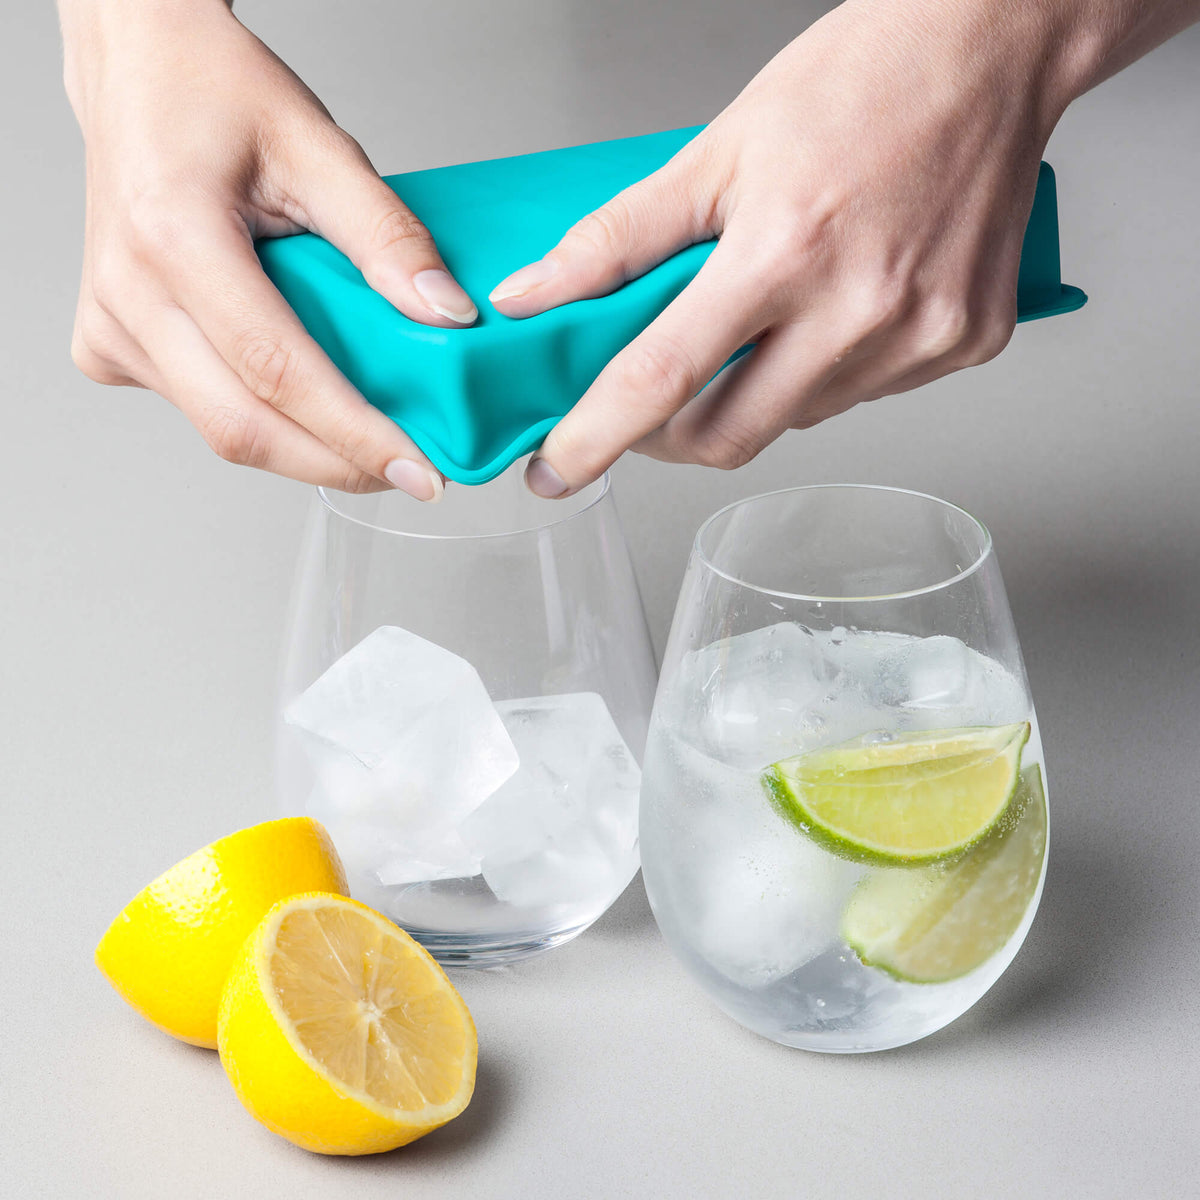 Flexible Silicone Ice Cube Tray